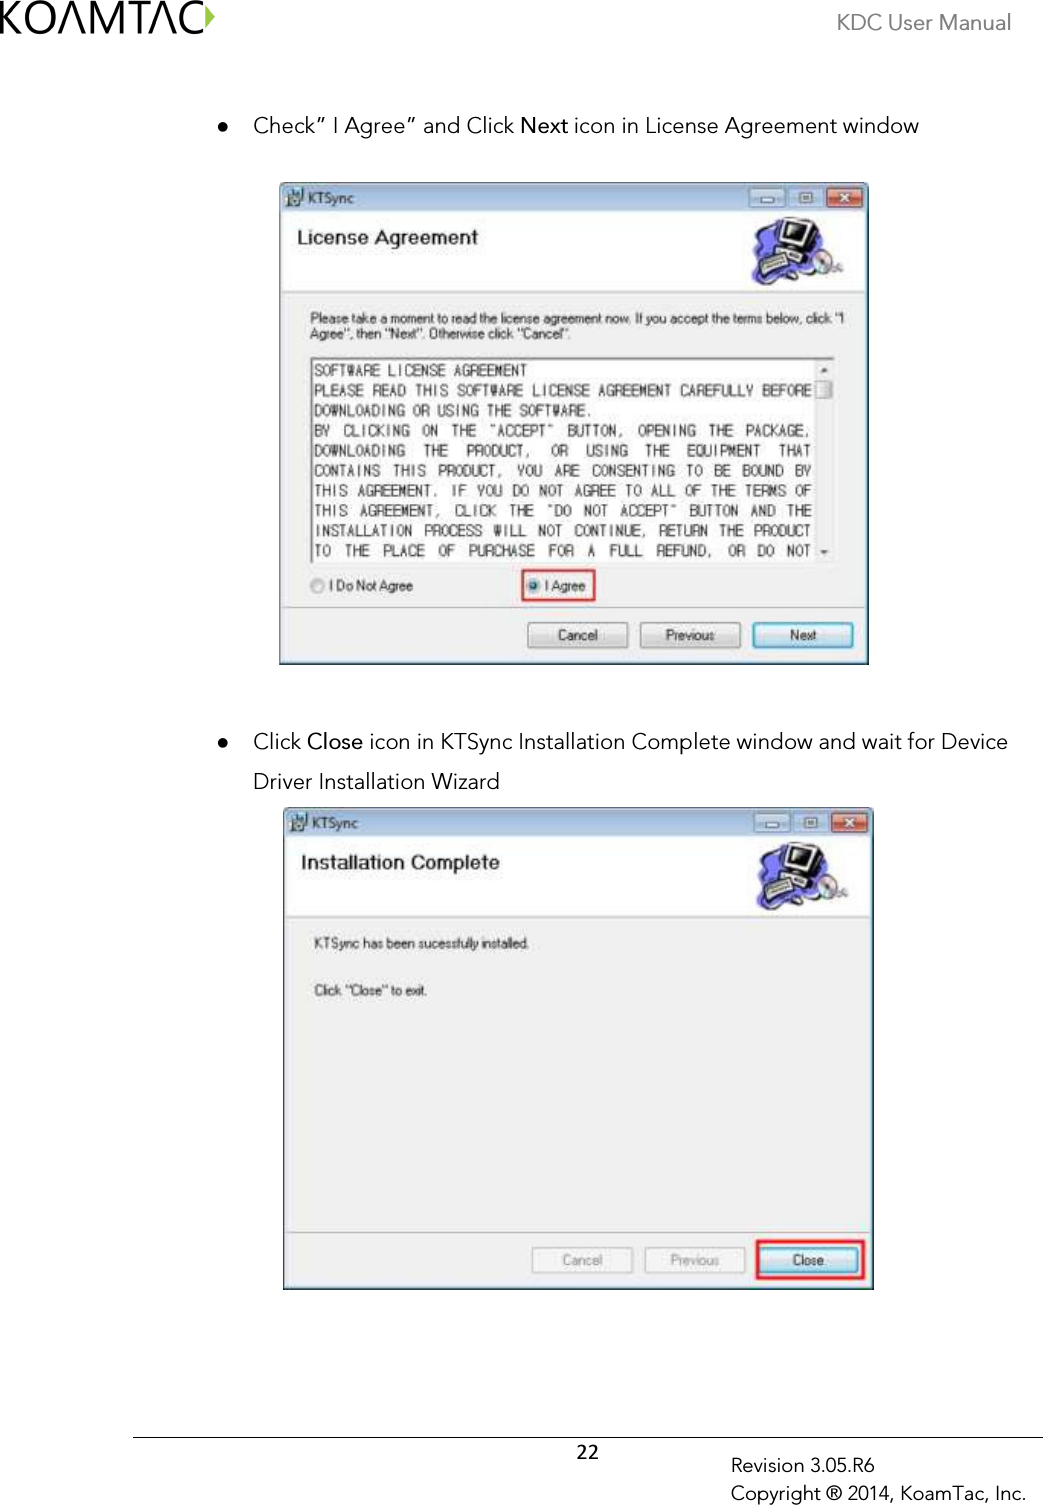 KDC User Manual  22 Revision 3.05.R6 Copyright ® 2014, KoamTac, Inc.   Check” I Agree” and Click Next icon in License Agreement window      Click Close icon in KTSync Installation Complete window and wait for Device Driver Installation Wizard      